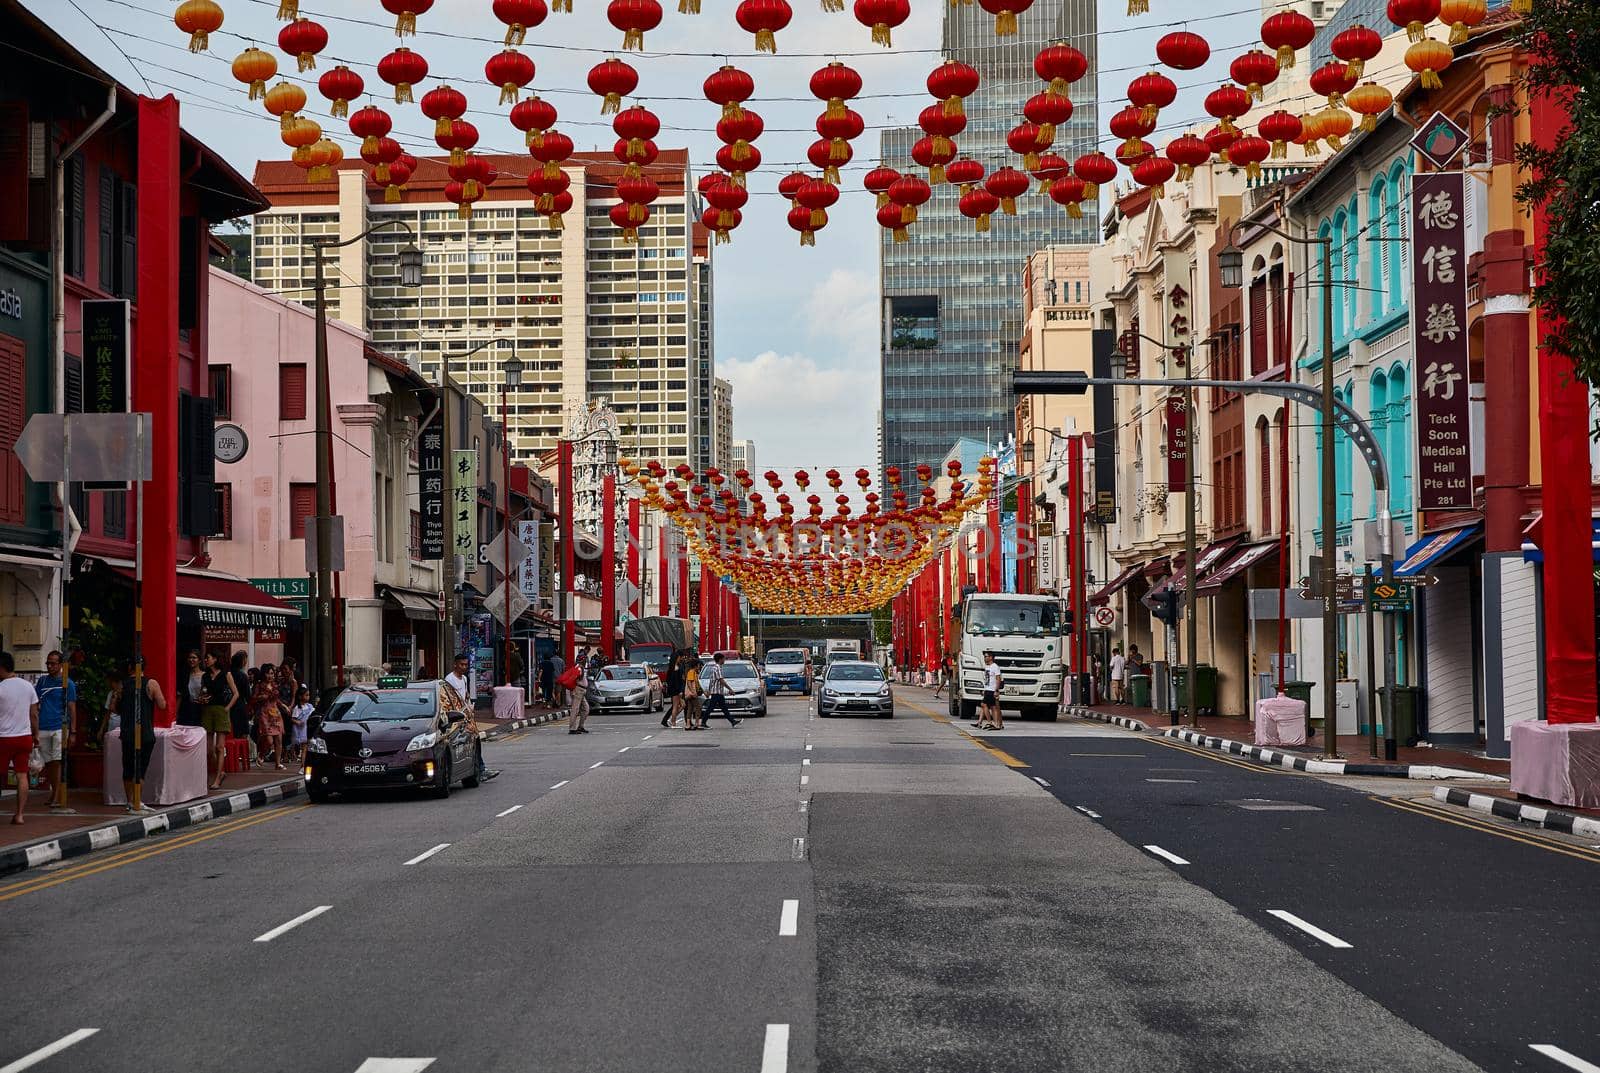 Decorations for the Chinese New Year. 19.01.2019 Chinatown, Singapore